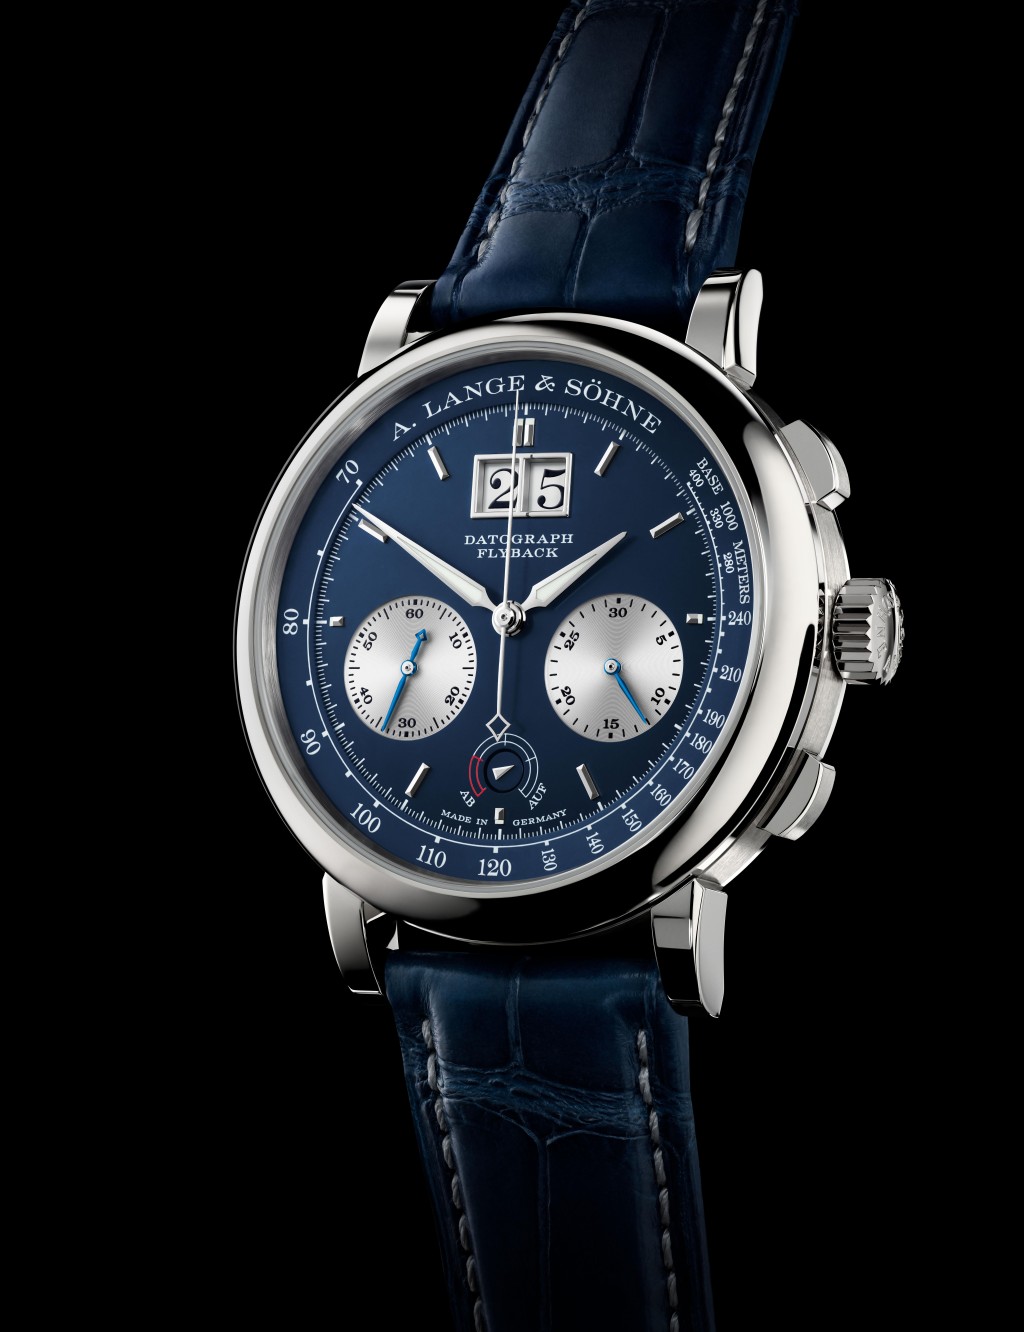 A. Lange & Söhne Datograph Up/Down限量版腕表。